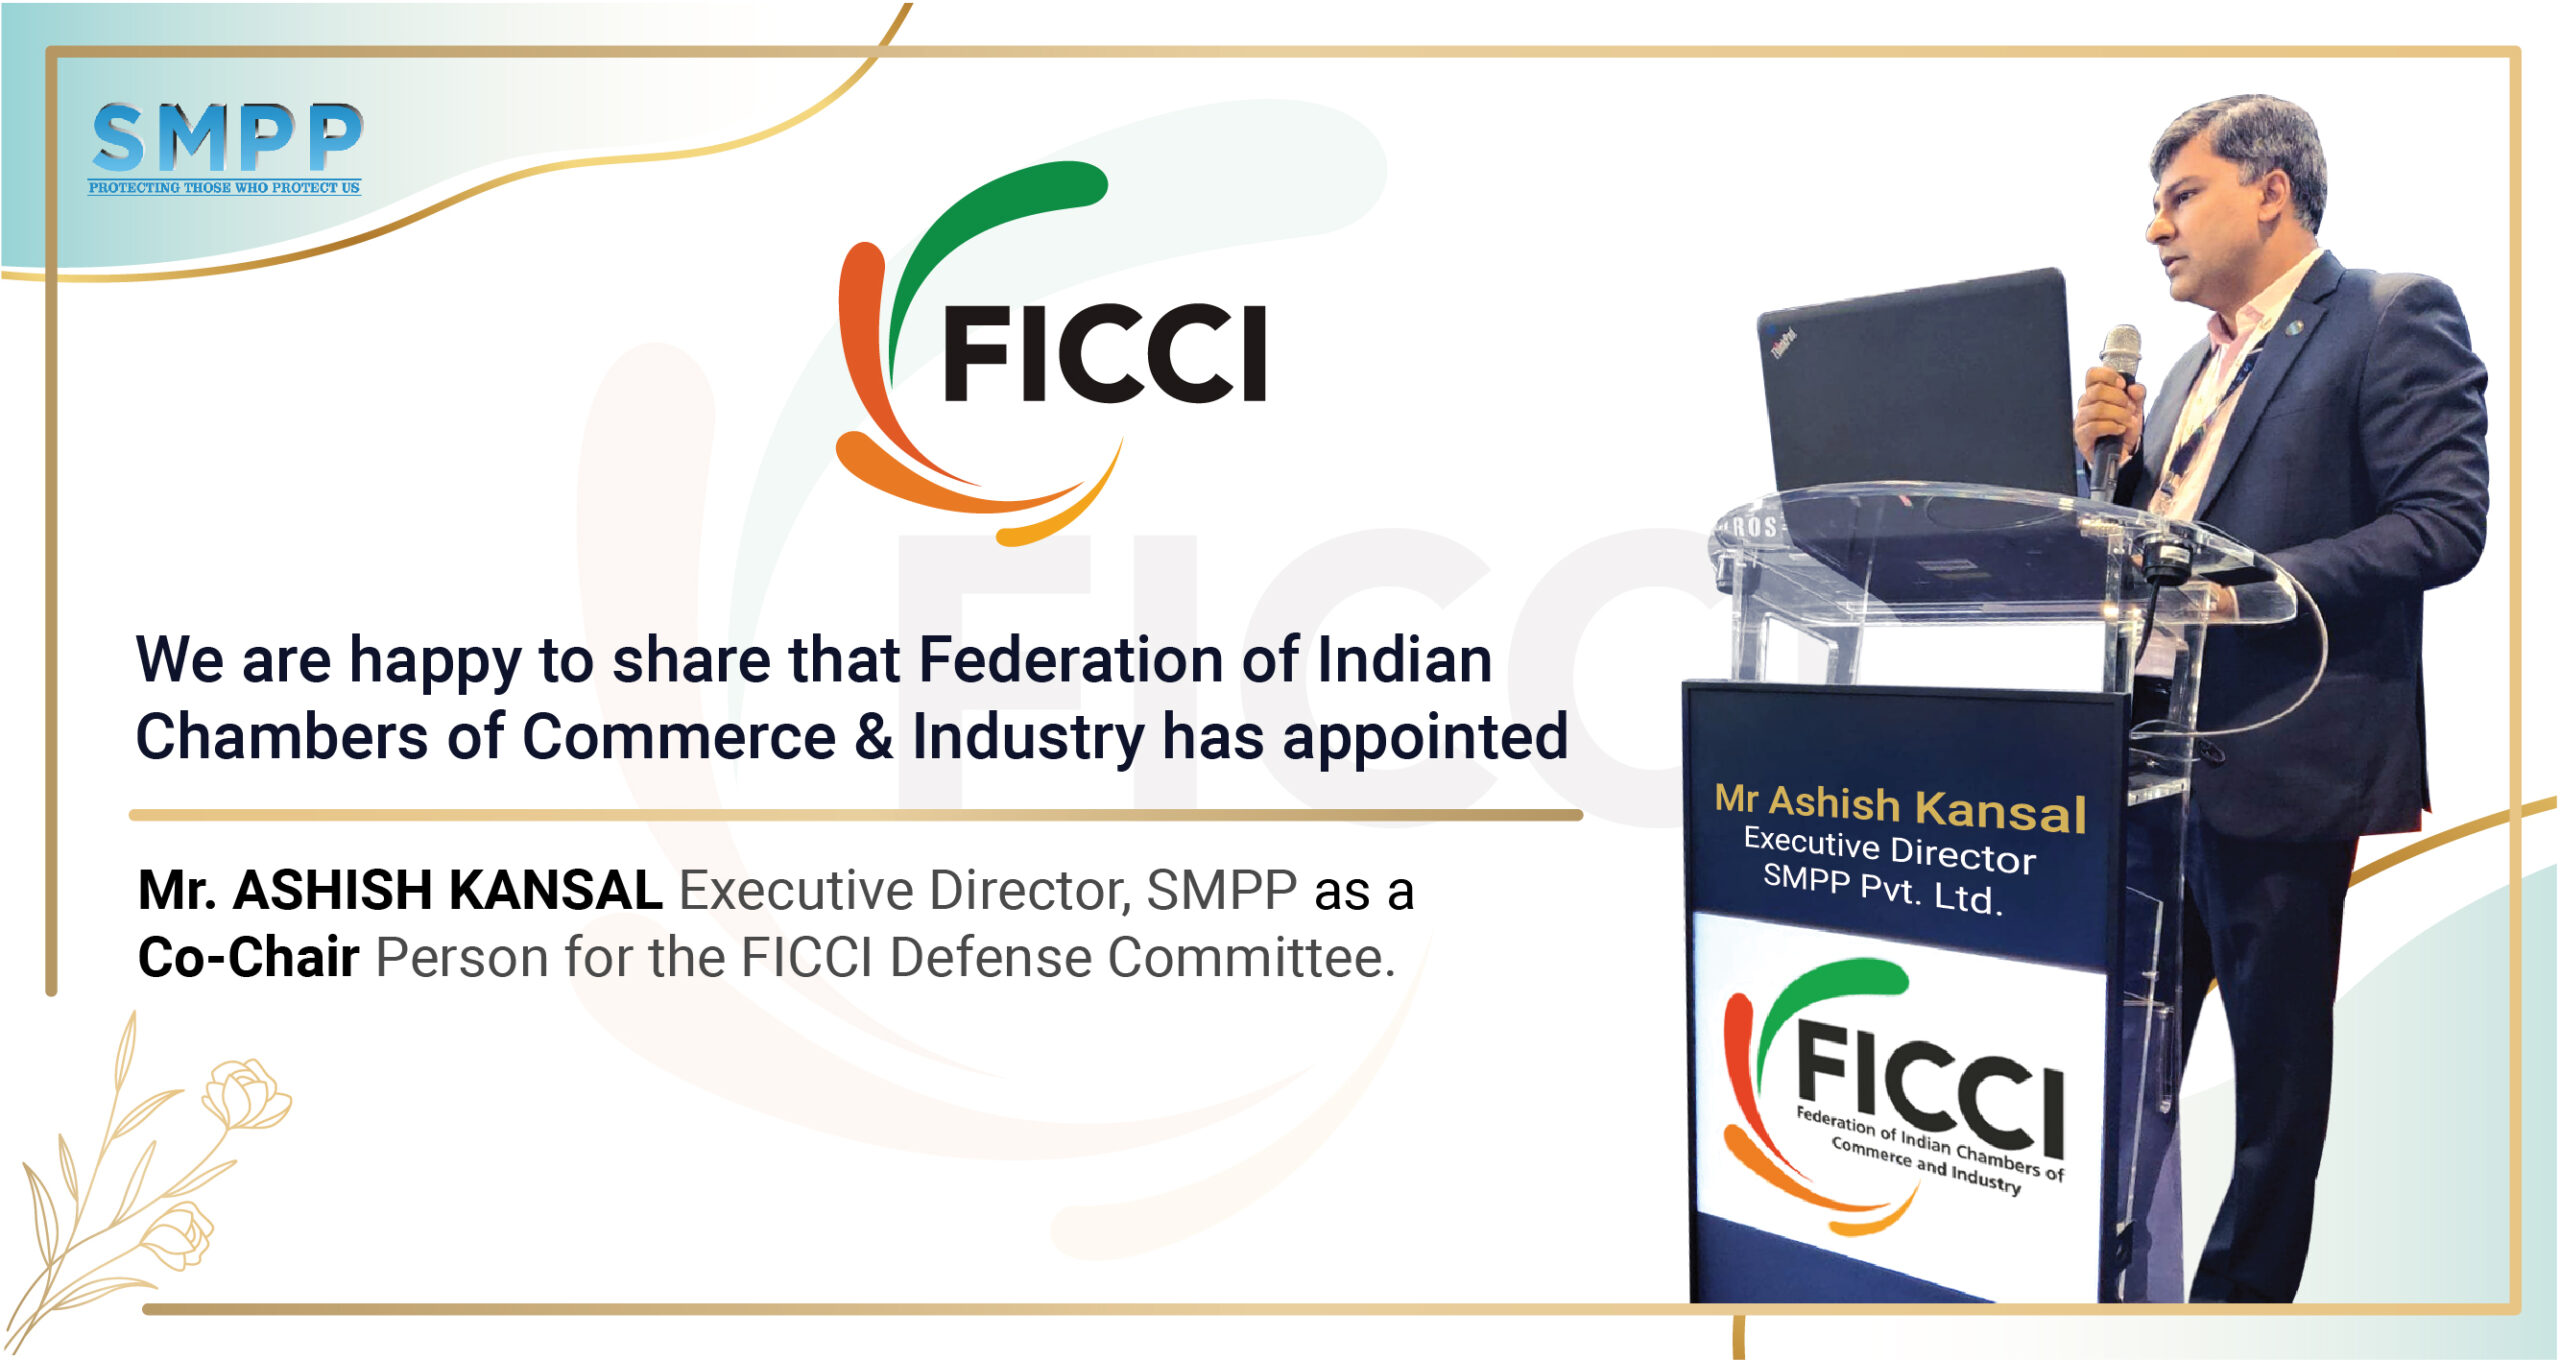 SMPP is happy to share FICCI's Nomination for Co-Chair FICCI Defense Committee.